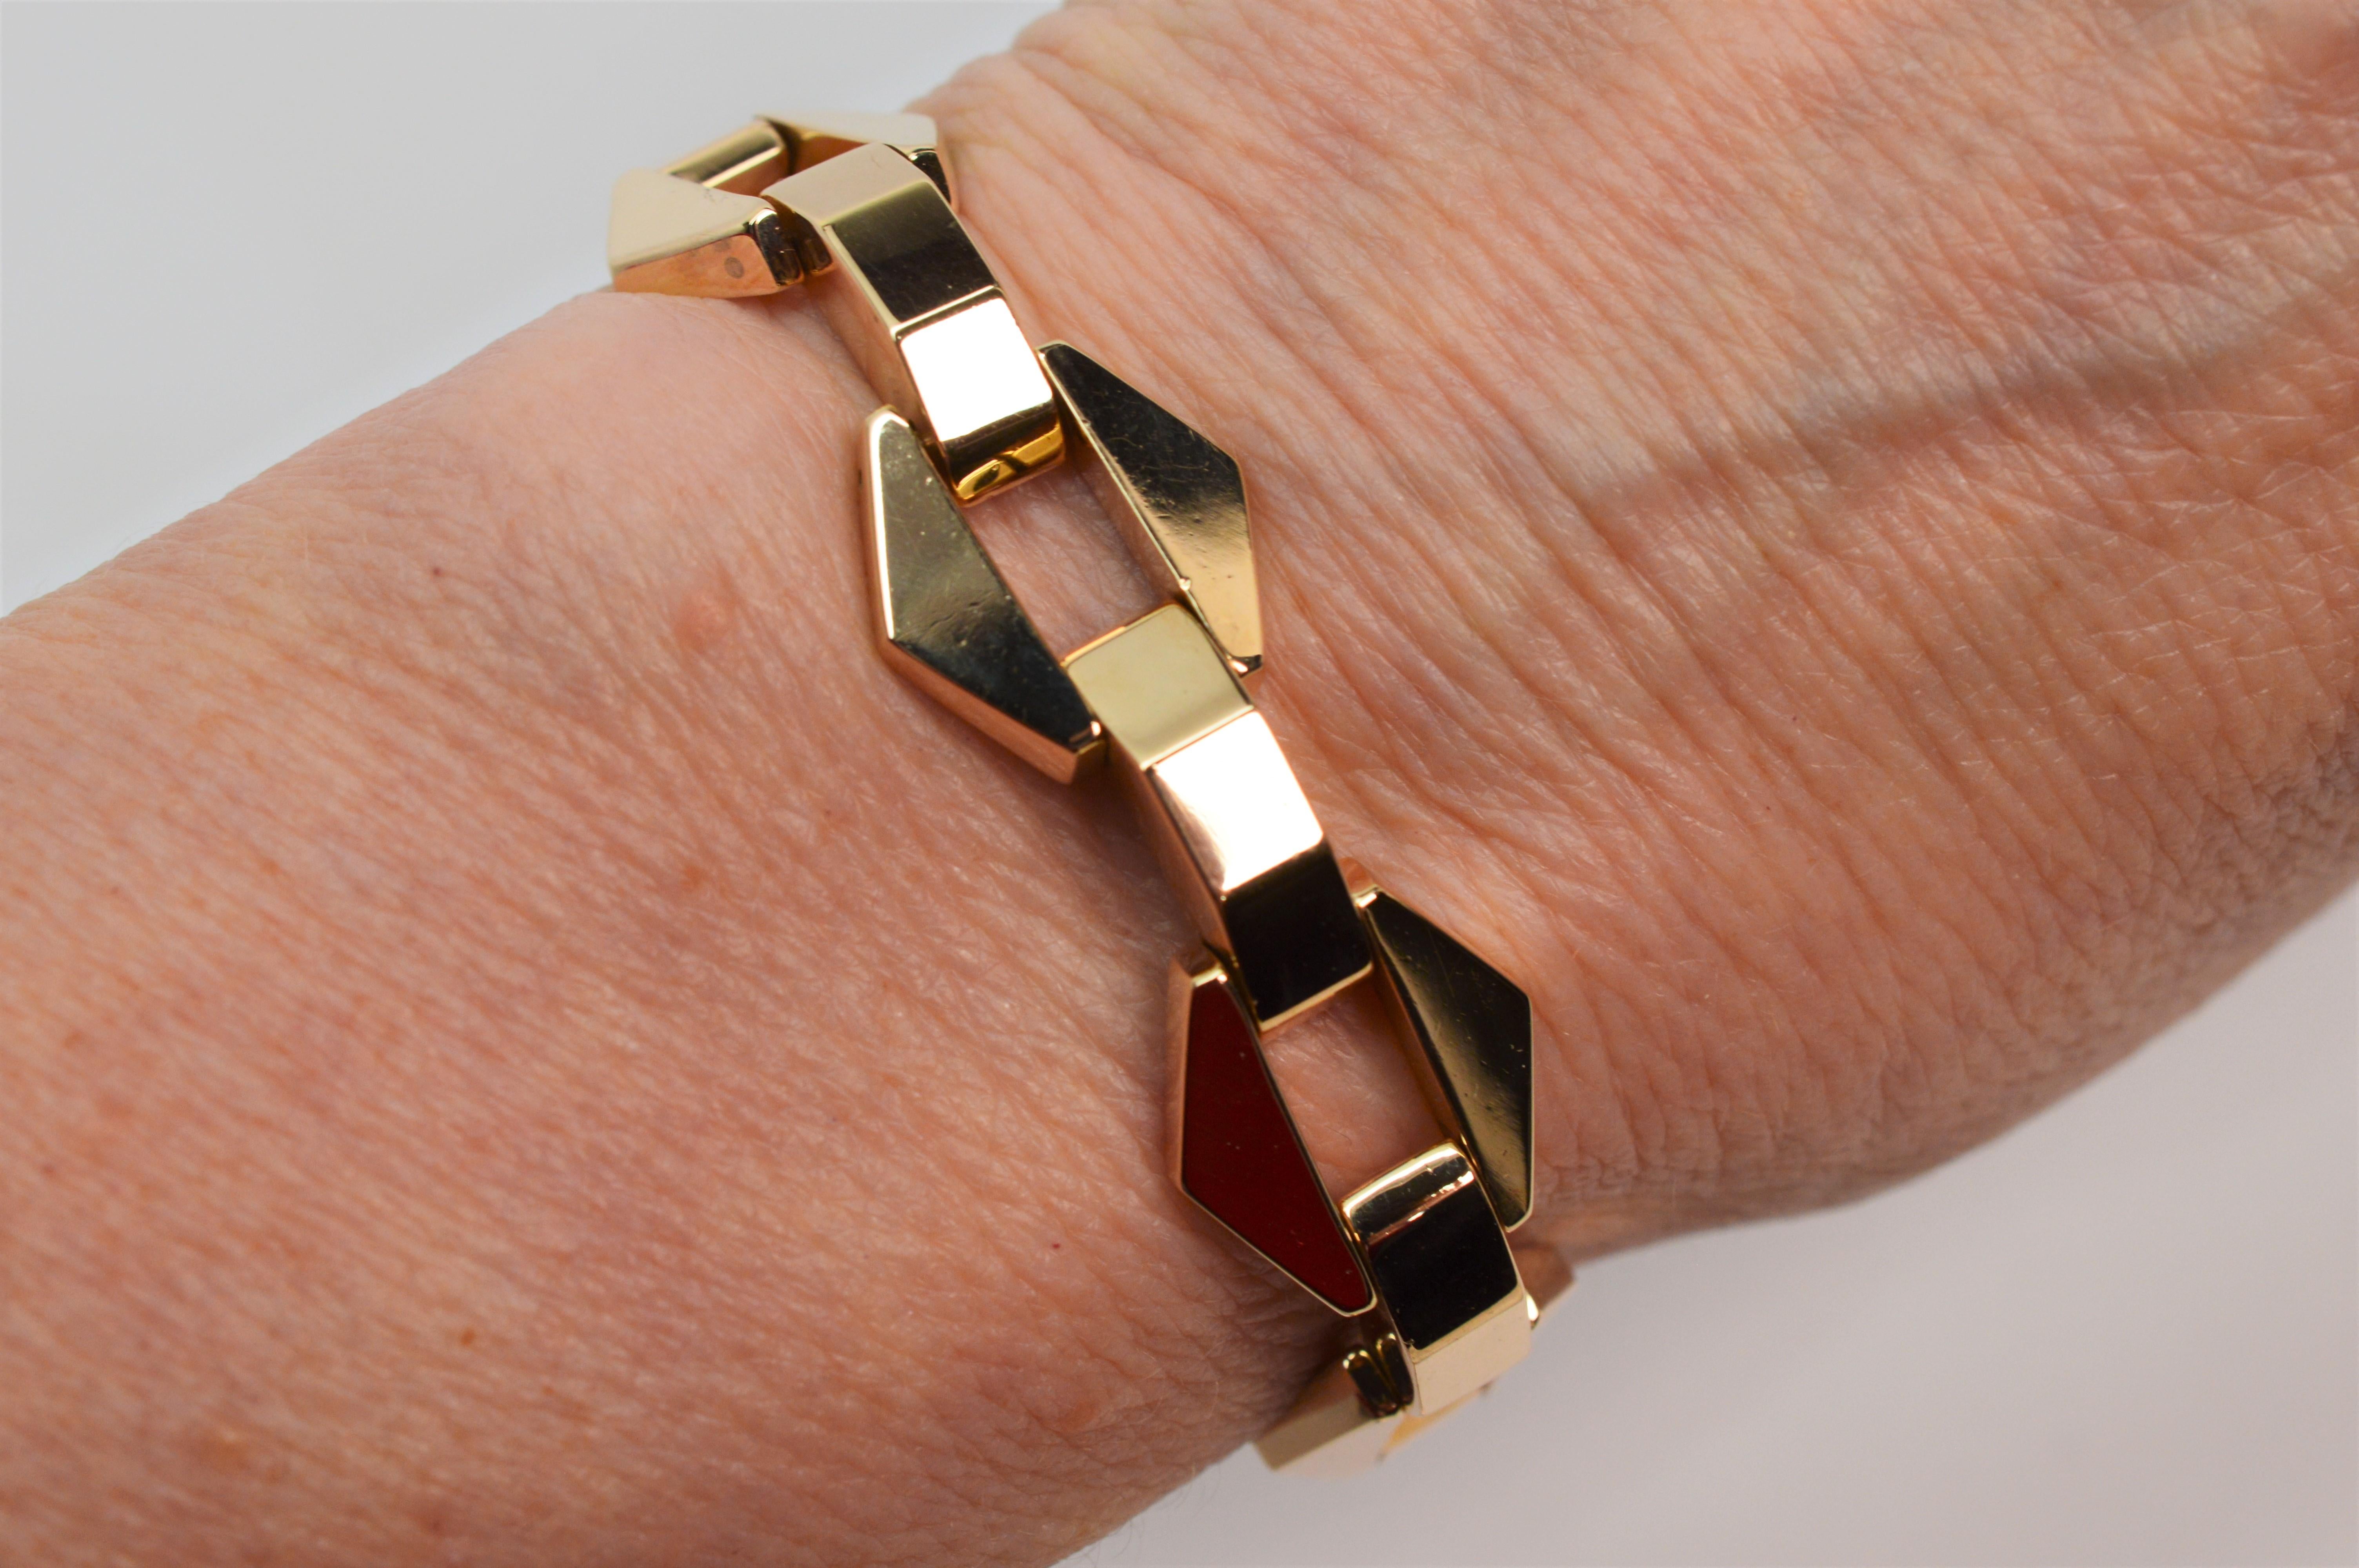 Open geometric links give this retro fourteen karat 14k yellow gold bracelet added interest. Circa 1960's, this estate piece measures 6.5 inch in length and is 5/8 inch wide. The bracelet has a matching link closure and safety chain. With it's